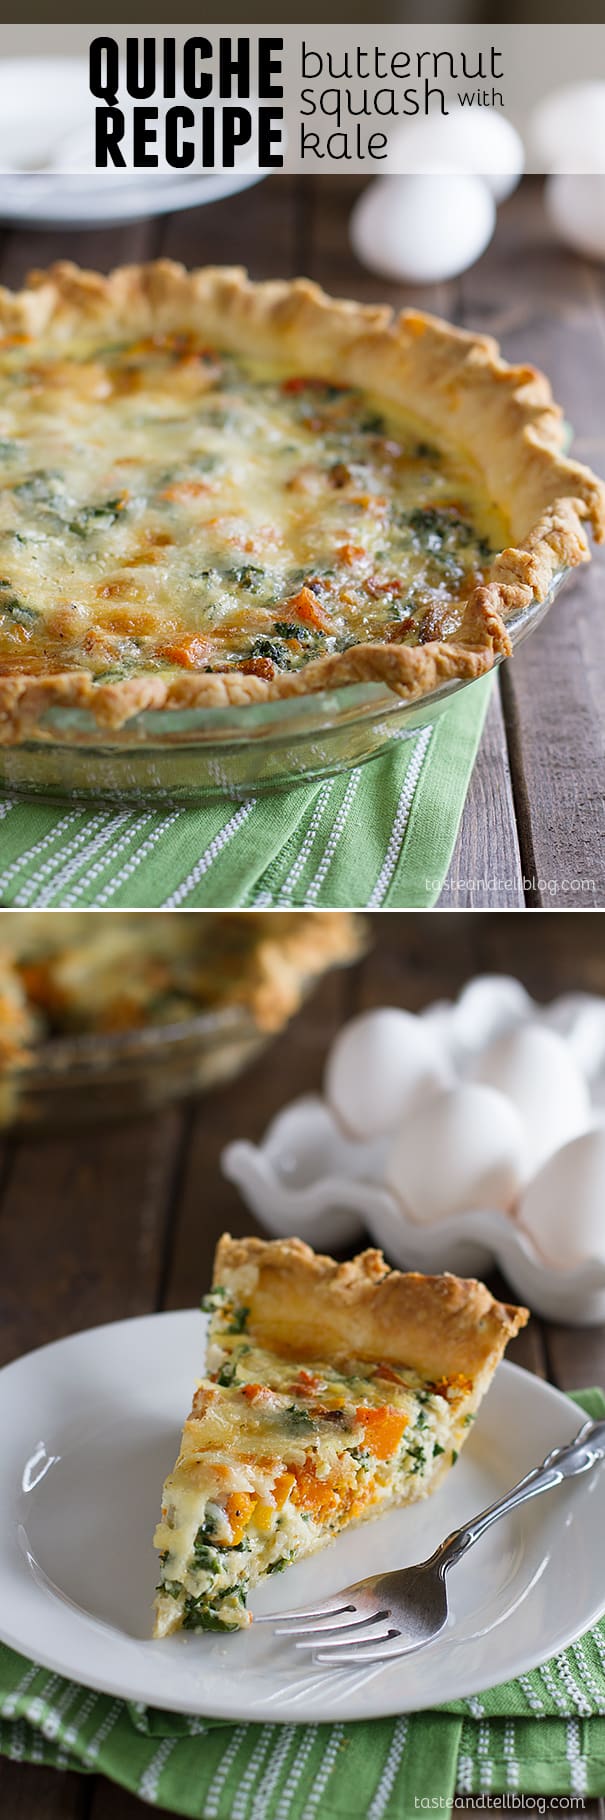 Quiche Recipe with Butternut Squash and Kale - Taste the flavors of the season in this quiche recipe that is filled with roasted butternut squash, kale and gruyere cheese.